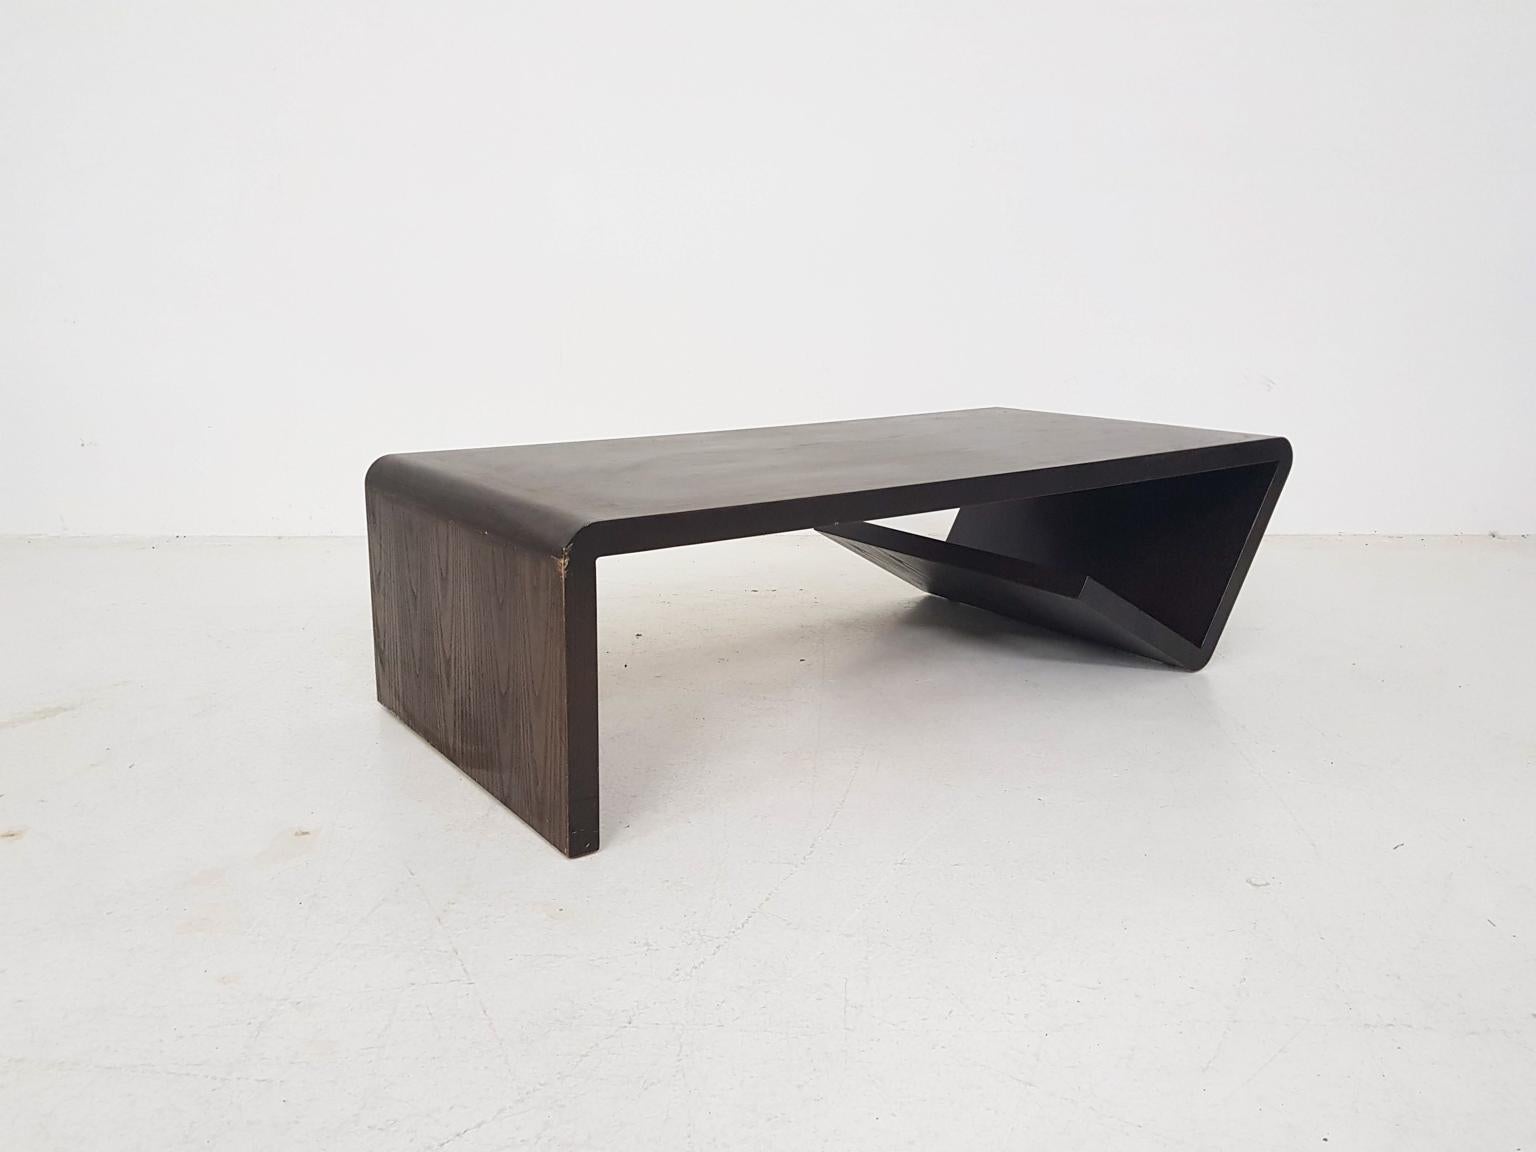 Heavy oak coffee table with a dark brown color, made and designed in the Netherlands in the 1970s. The table is made of one piece, which has a stylish curved shaped. The shape end underneath the table and forms a storing place for magazines.
We